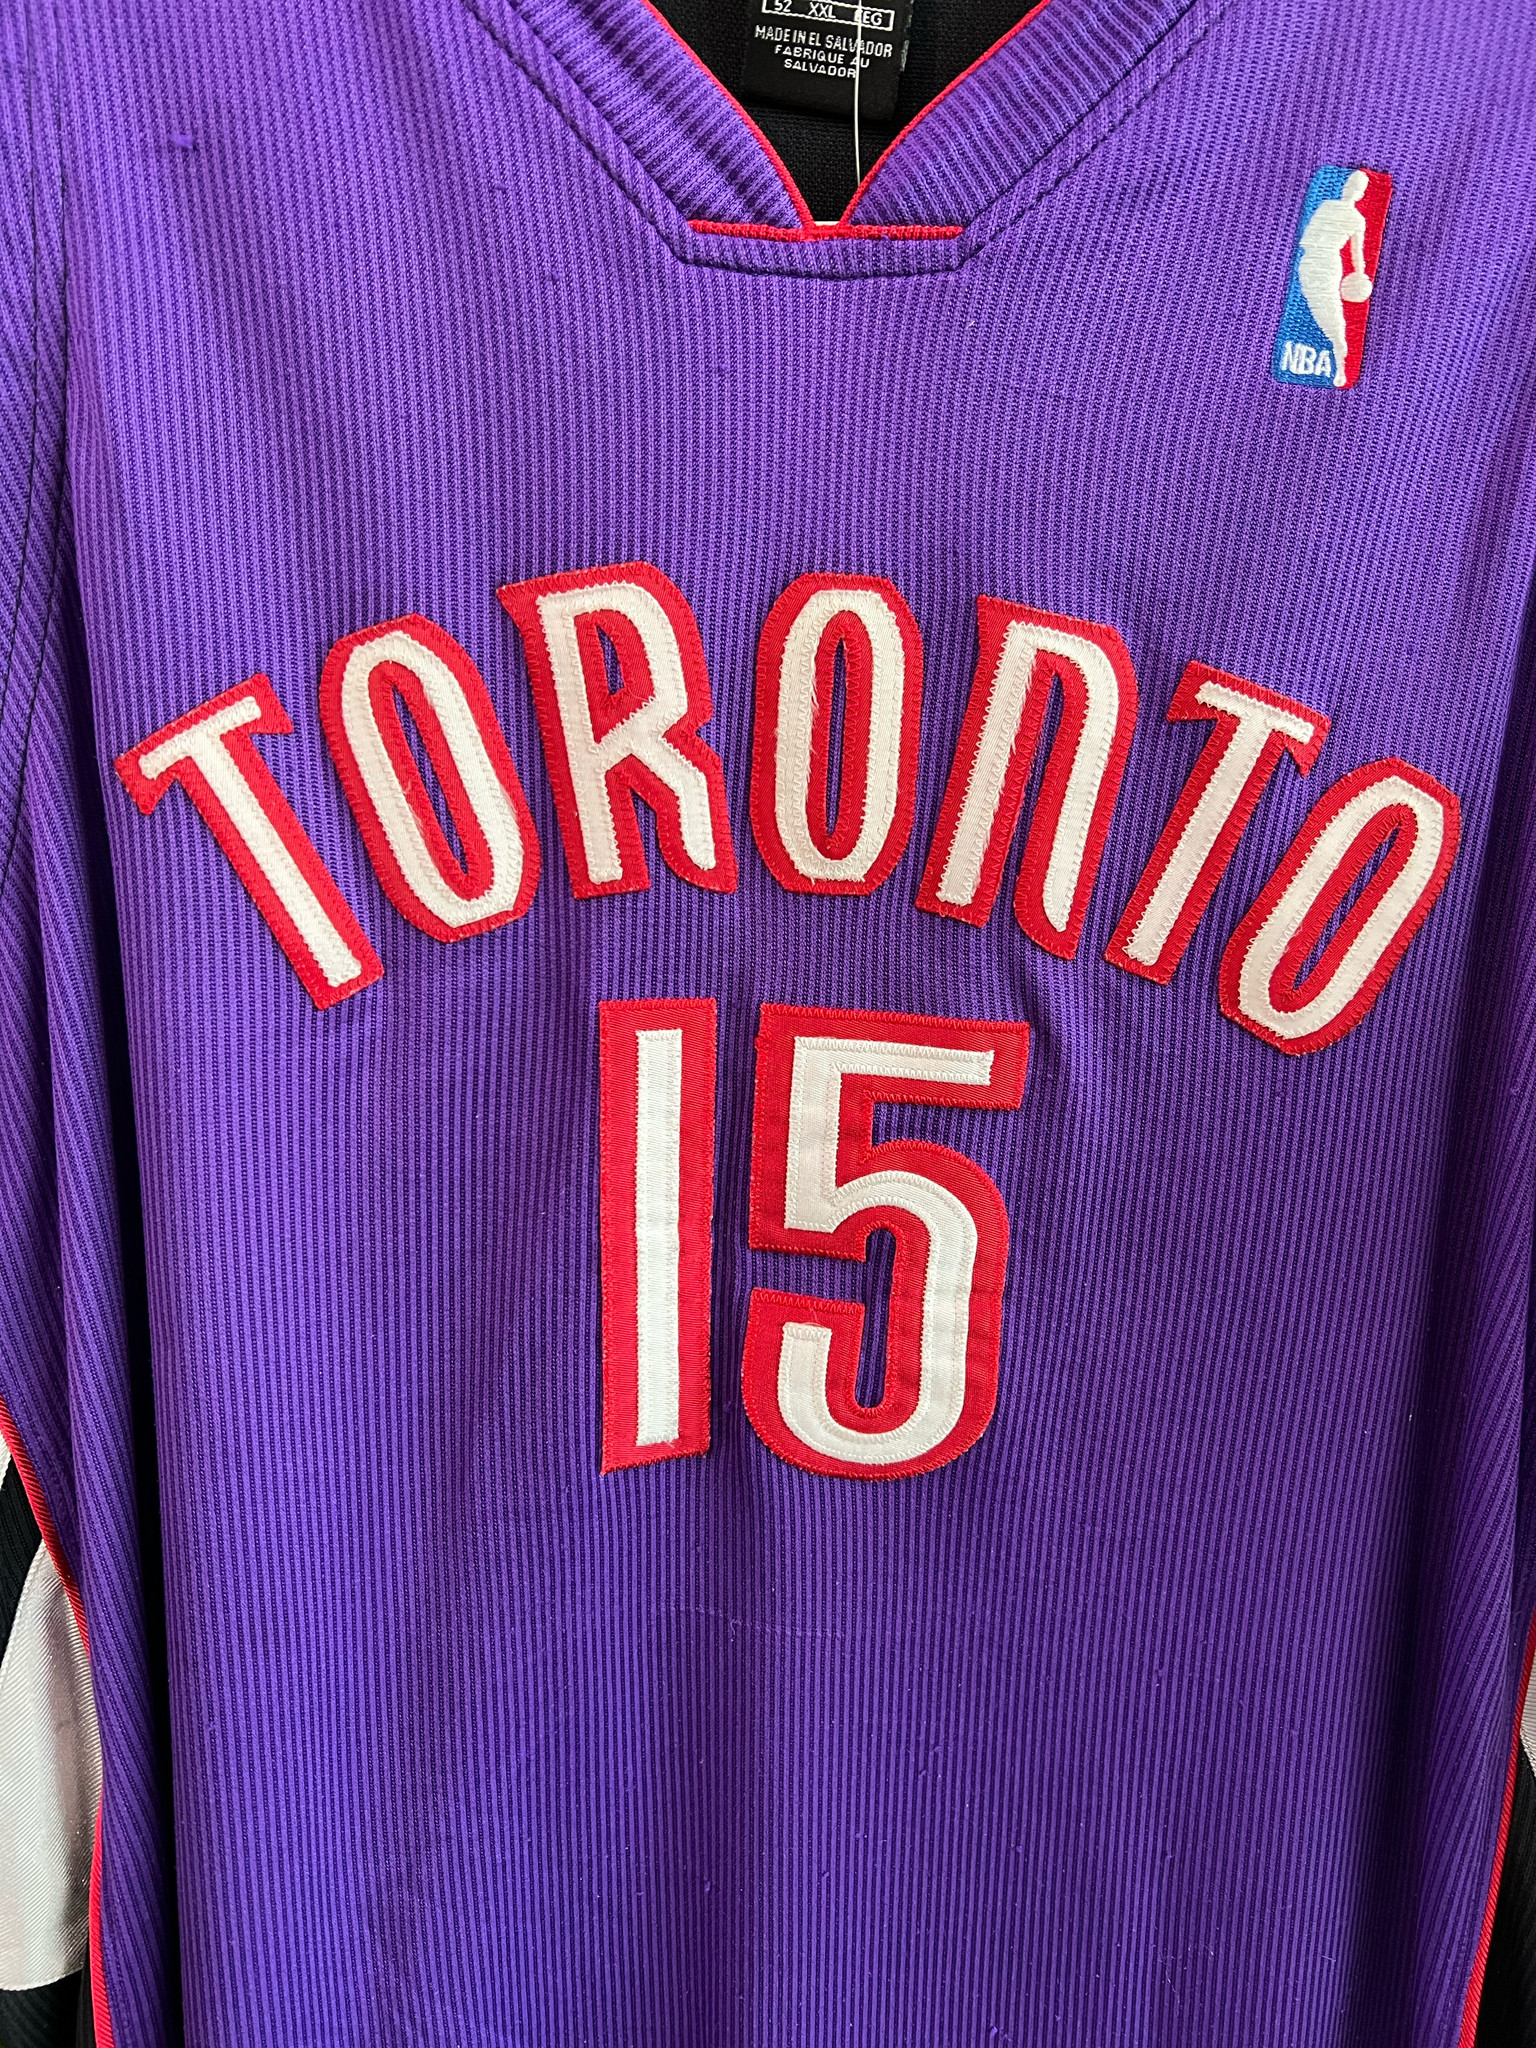 Official Toronto Raptors Authentic Jerseys, Official Nike Jersey